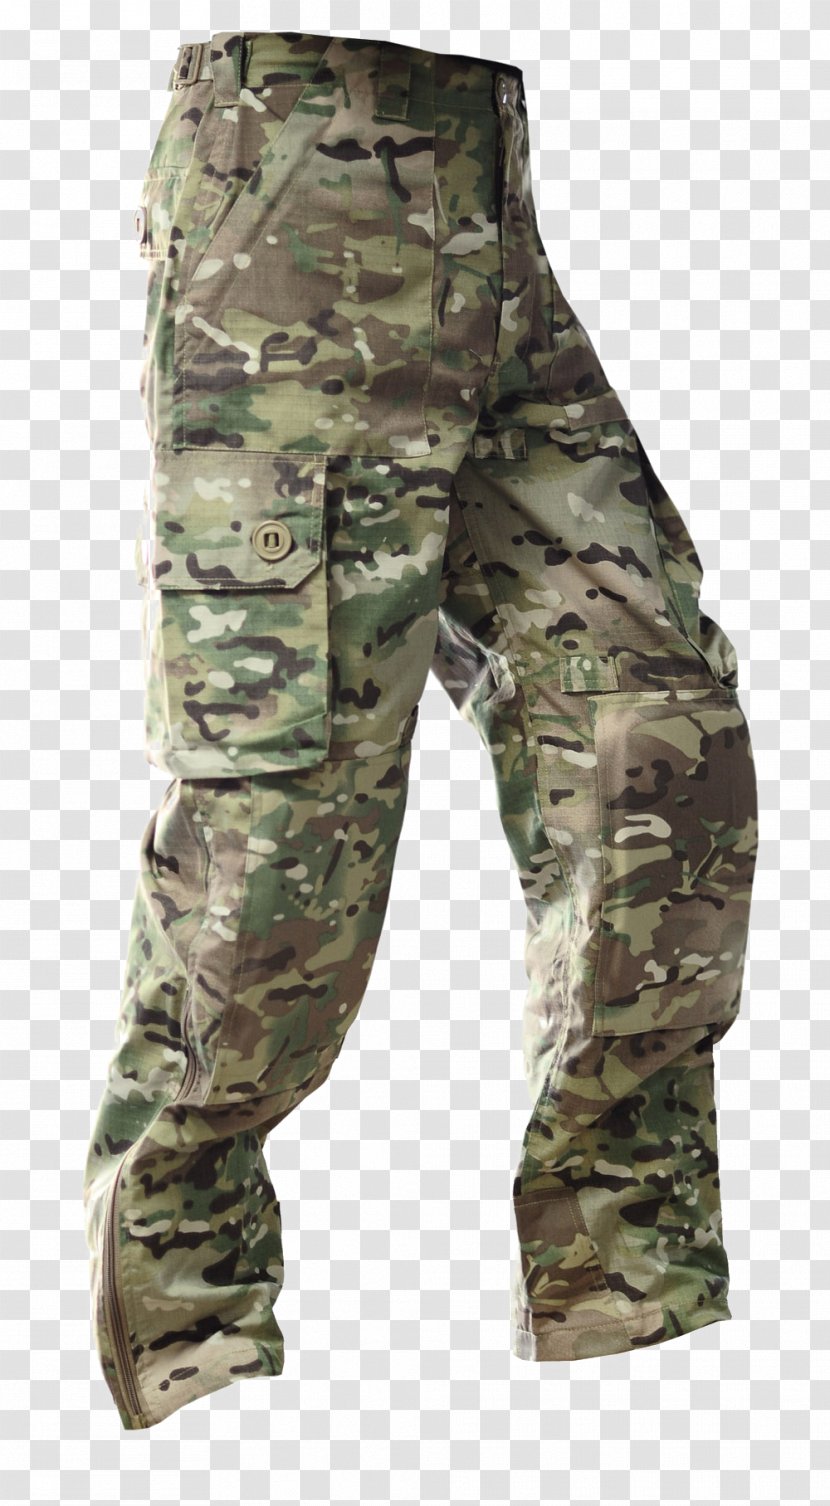 MultiCam Clothing Jacket Camouflage Pants - Military Transparent PNG